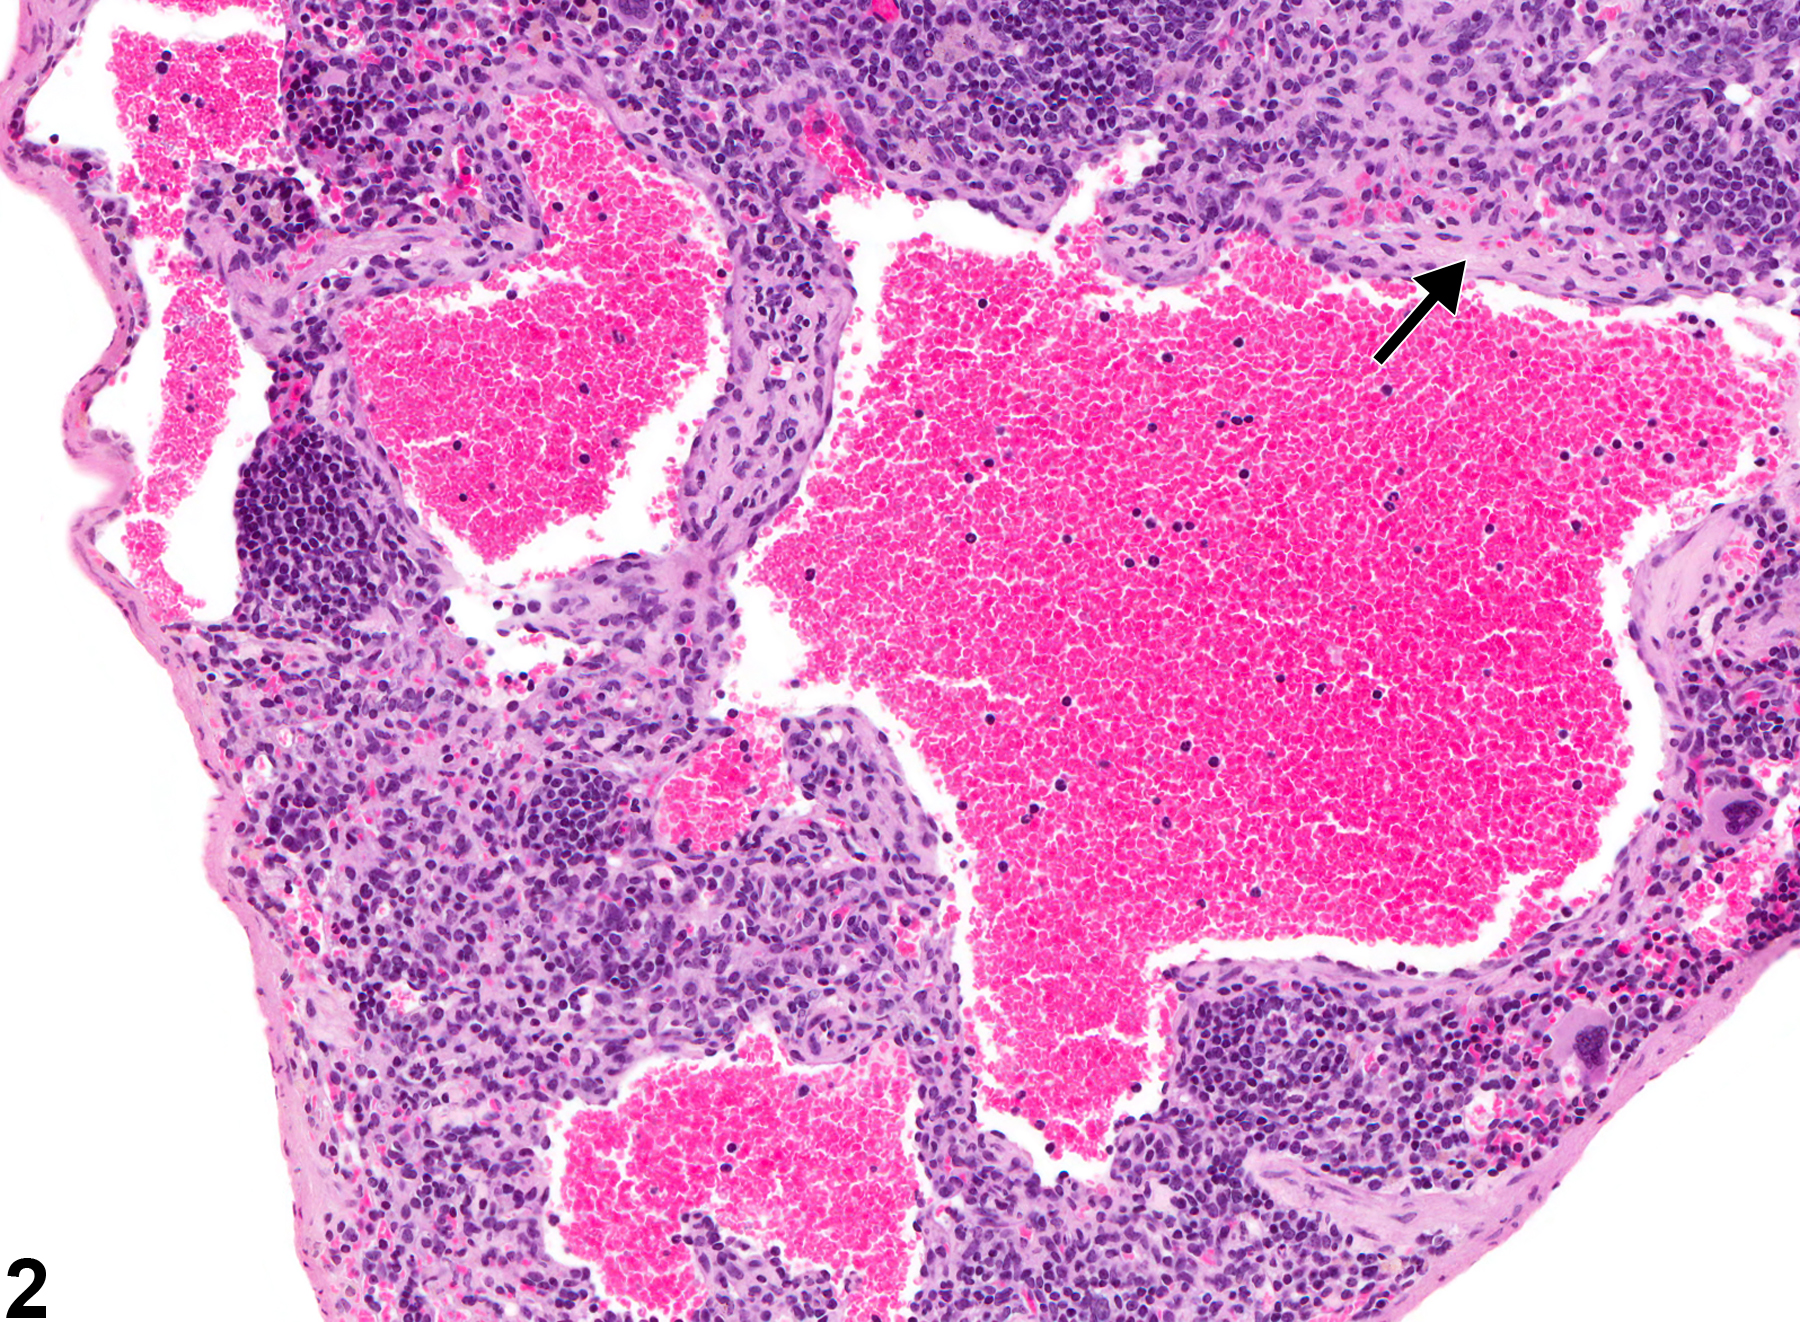 Image of angiectasis in the spleen from a female B6C3F1/N mouse in a chronic study